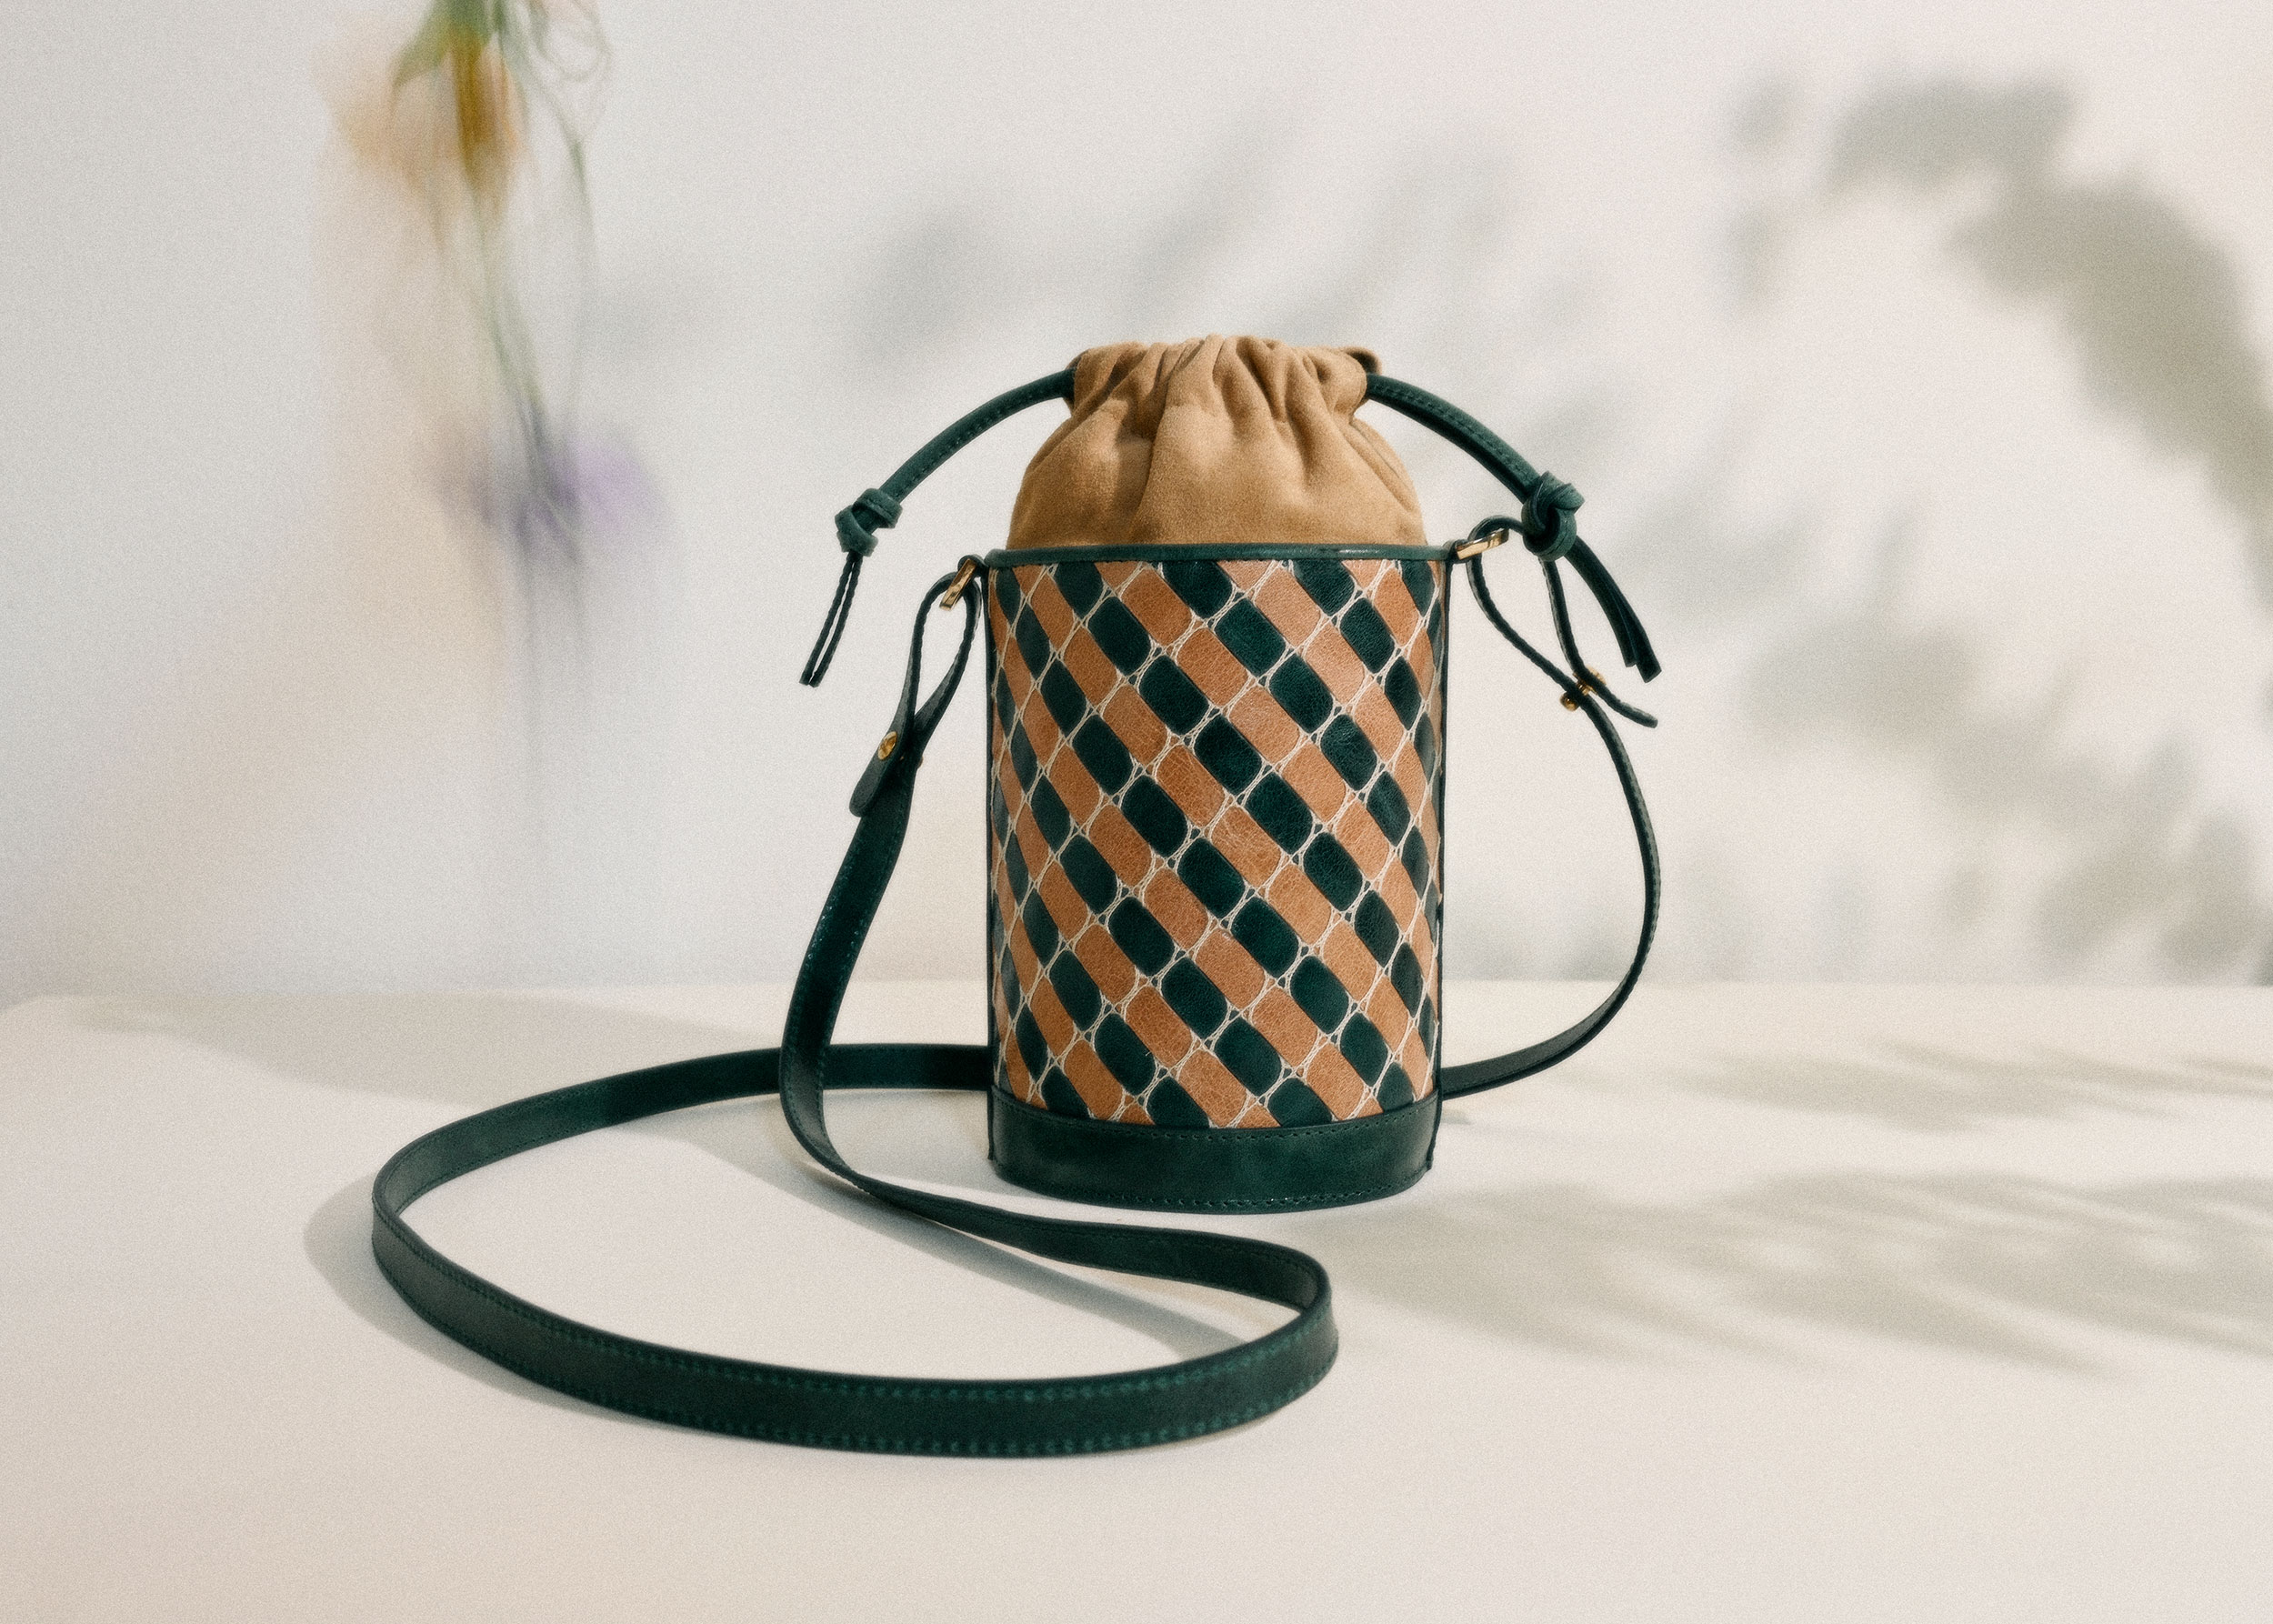 The Barrel Bag in Tenement Green and Tablet